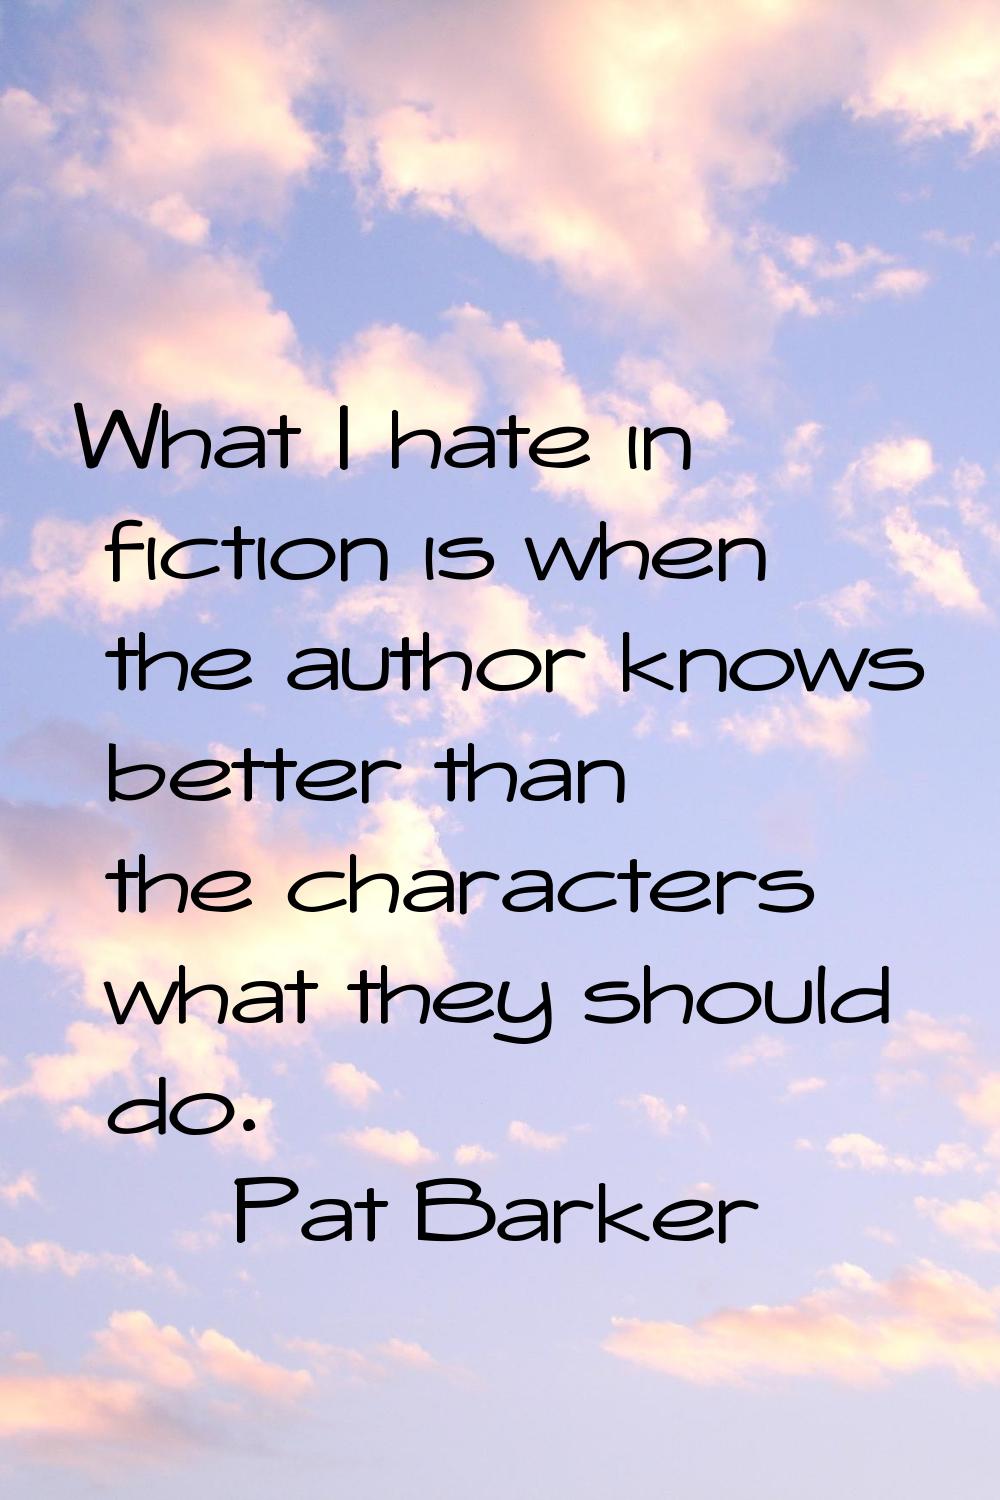 What I hate in fiction is when the author knows better than the characters what they should do.